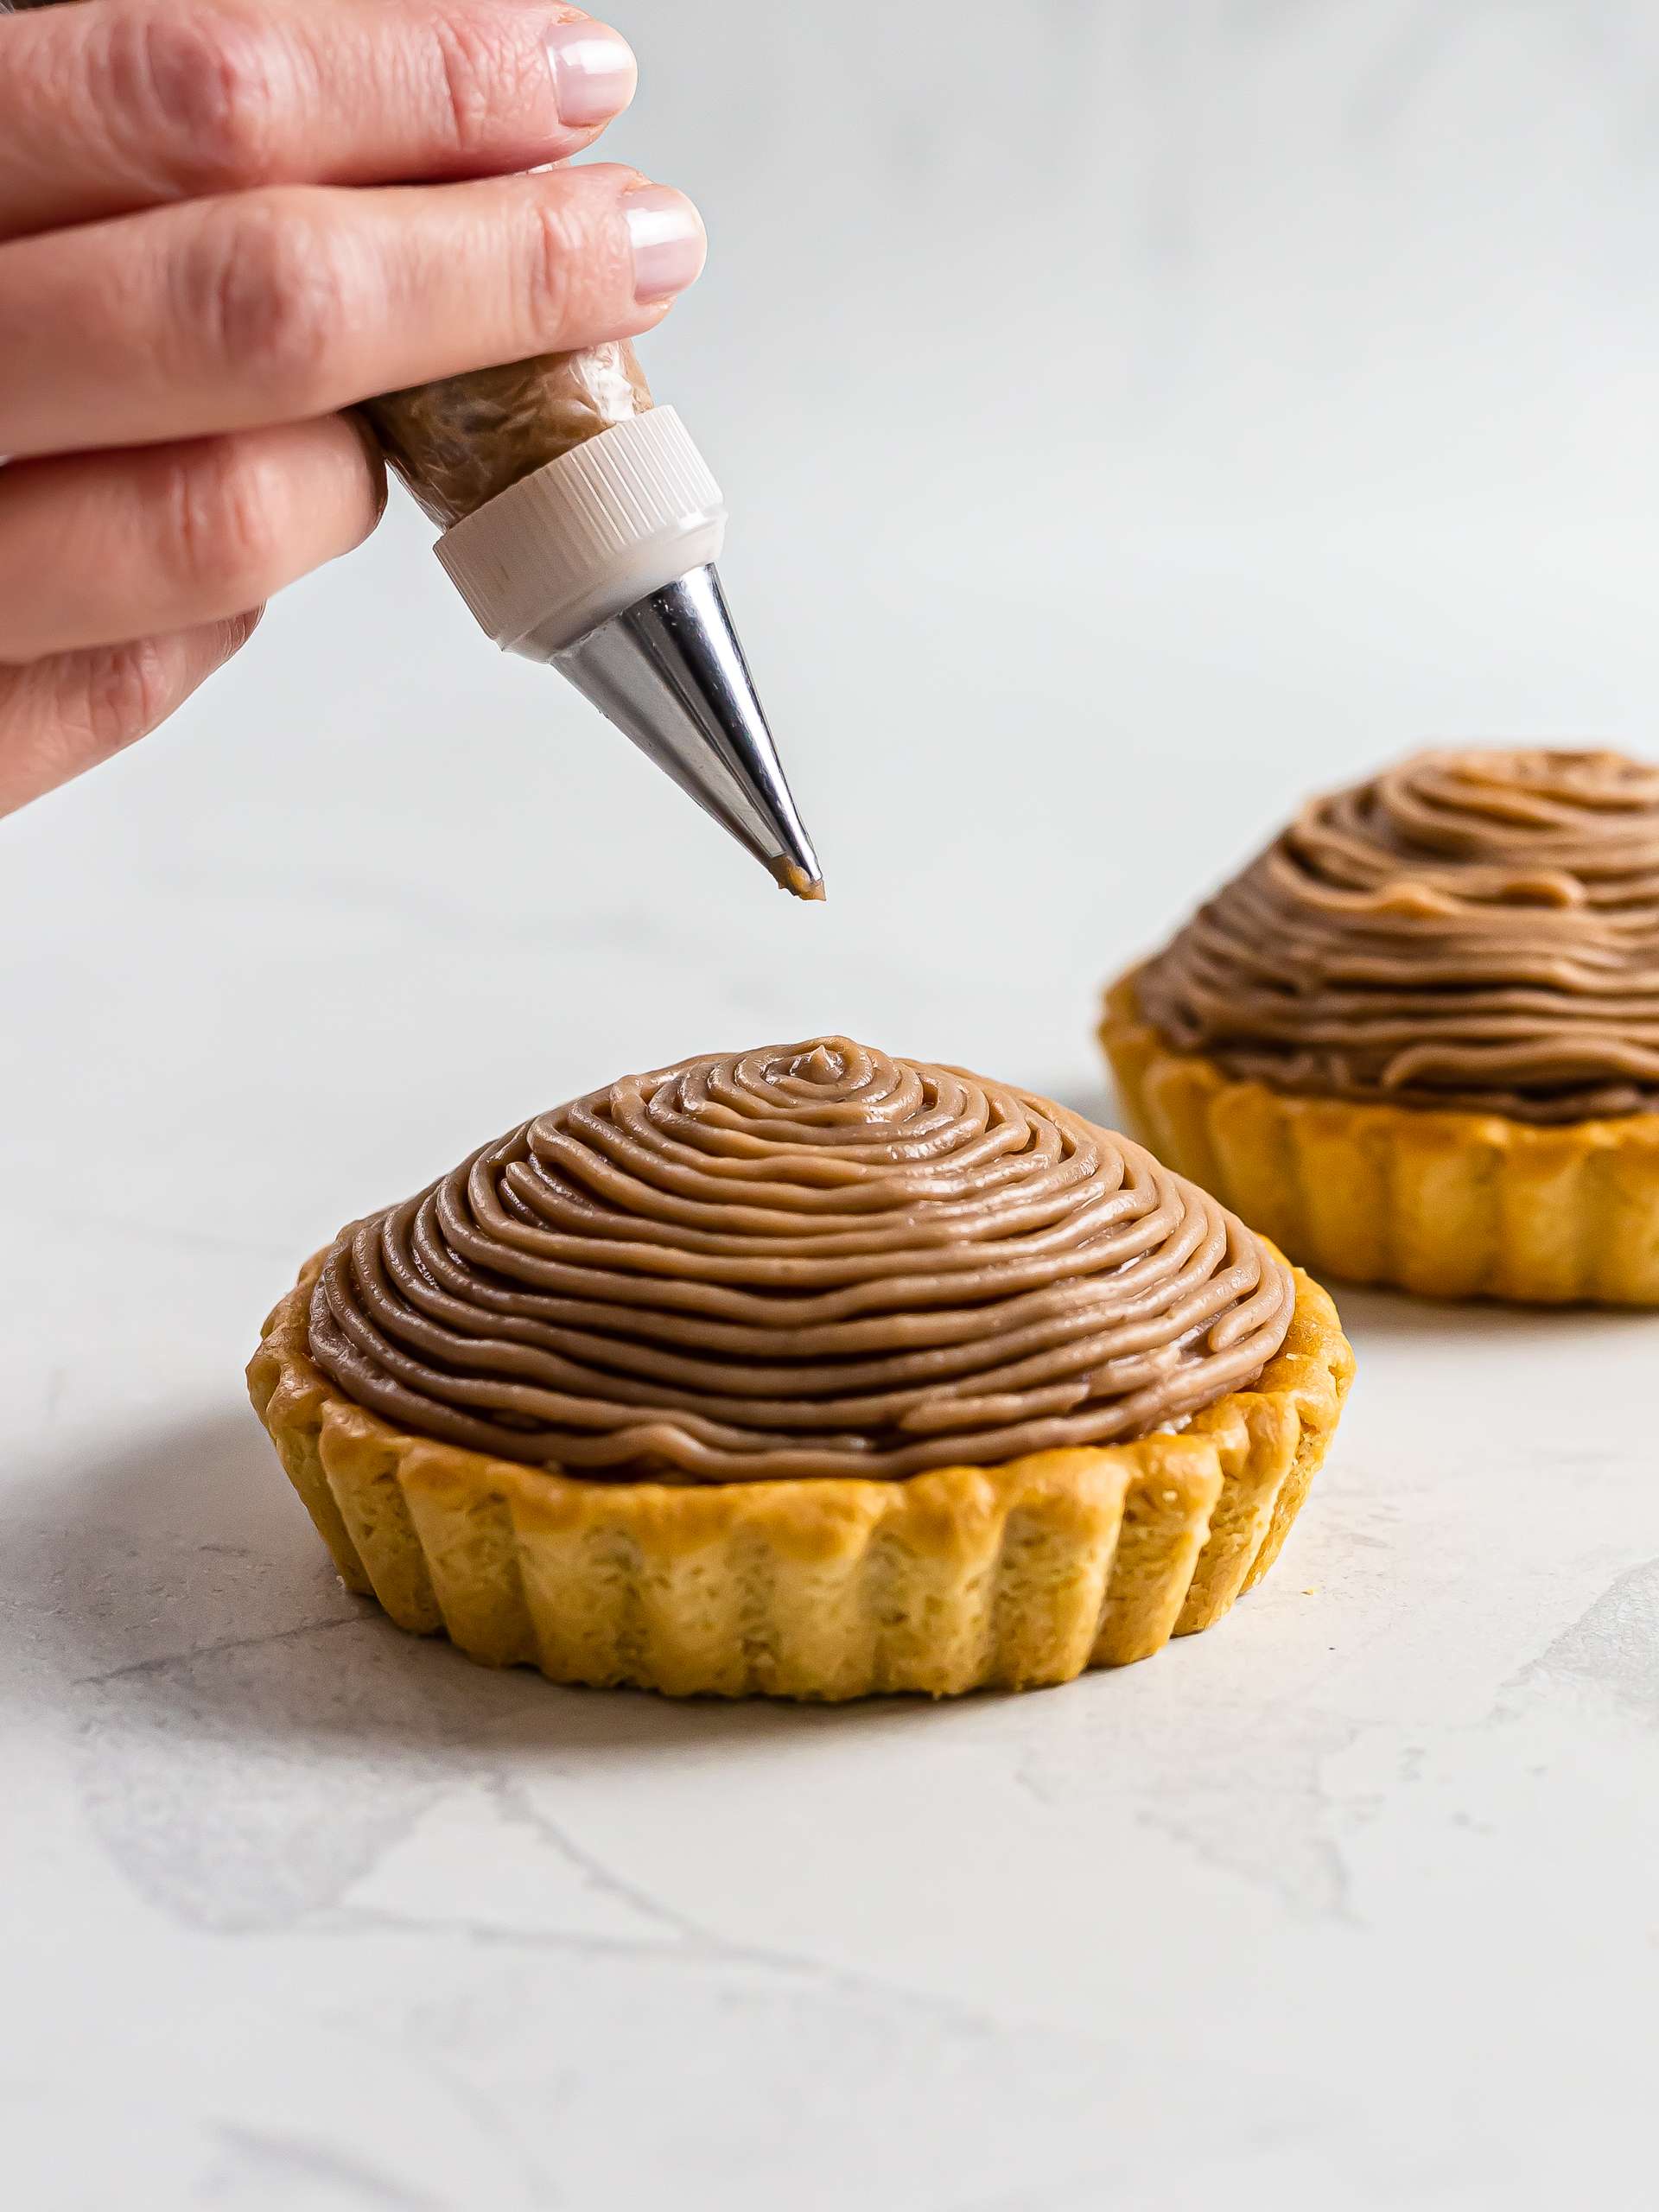 mont blanc tarts with chestnut cream topping